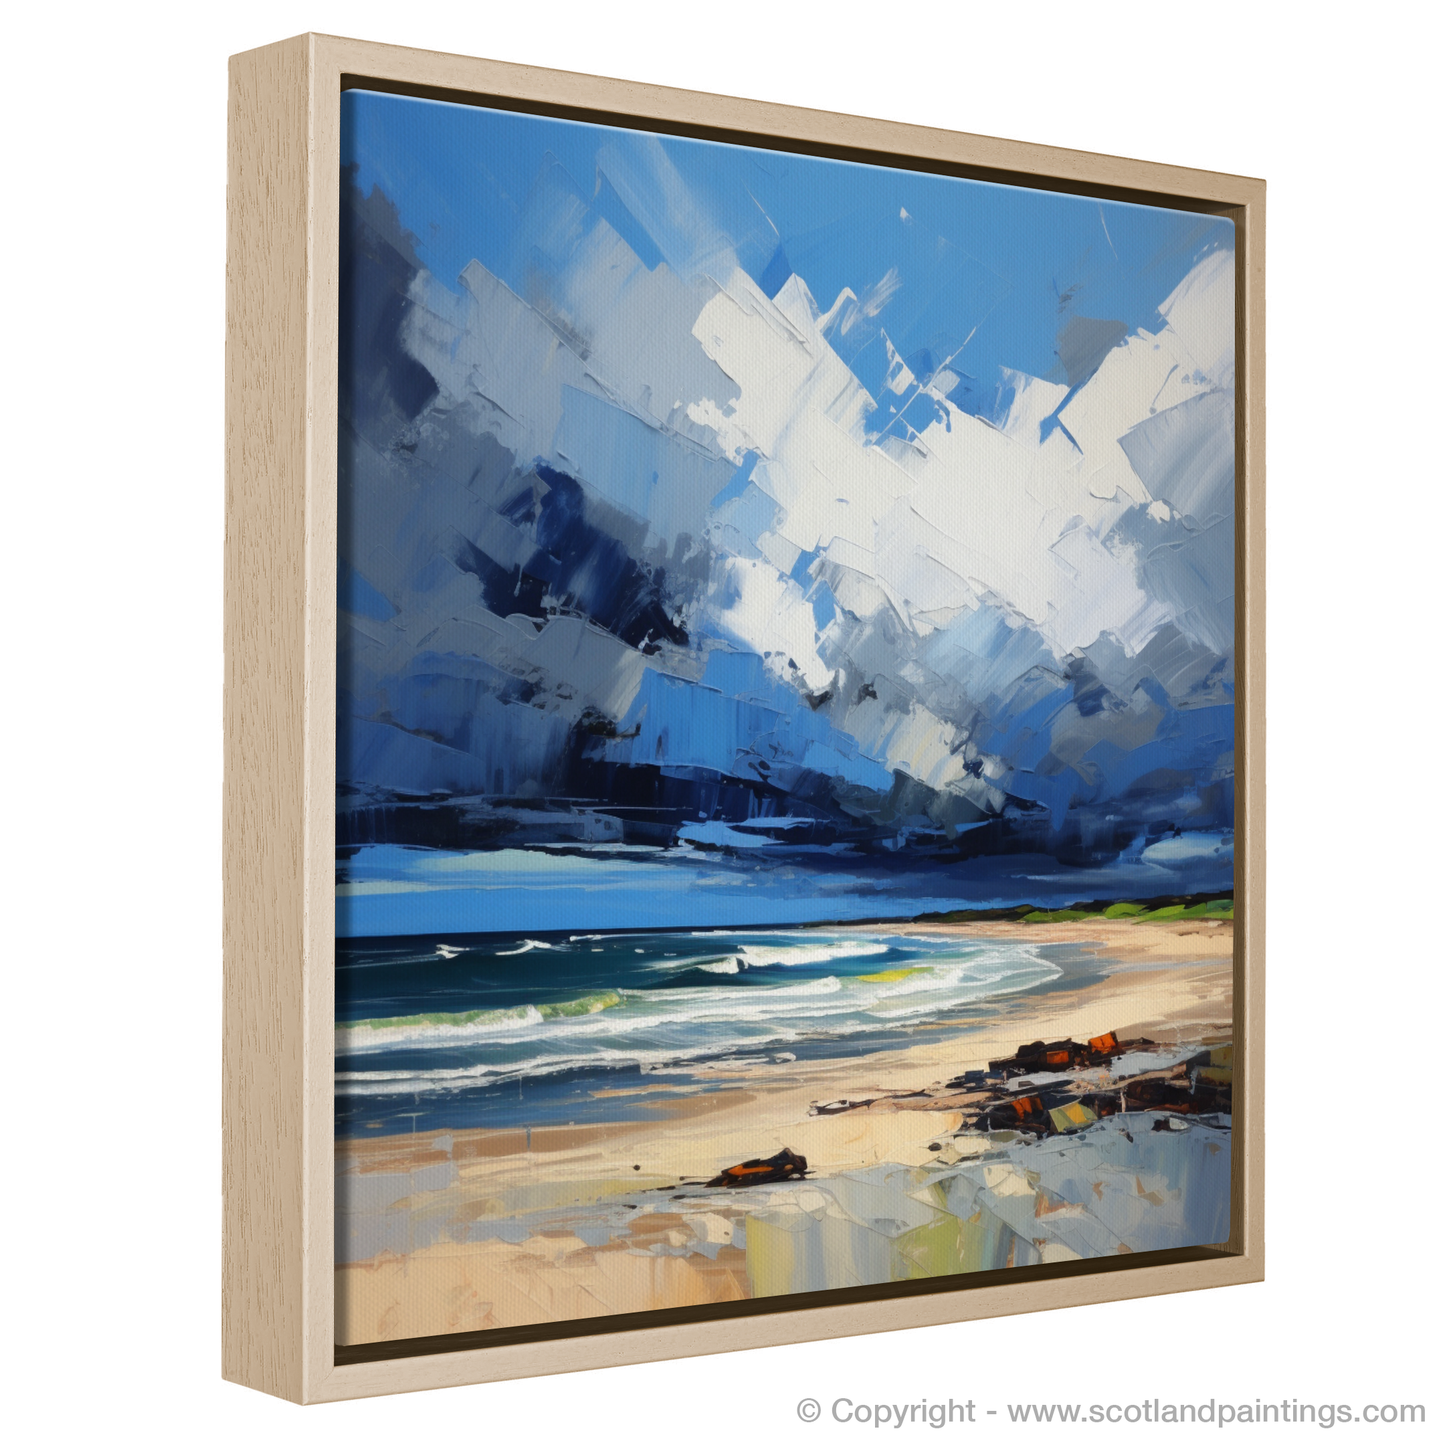 Painting and Art Print of Gullane Beach with a stormy sky entitled "Stormy Skies over Gullane Beach: An Expressionist Ode to Scotland's Coastal Majesty".